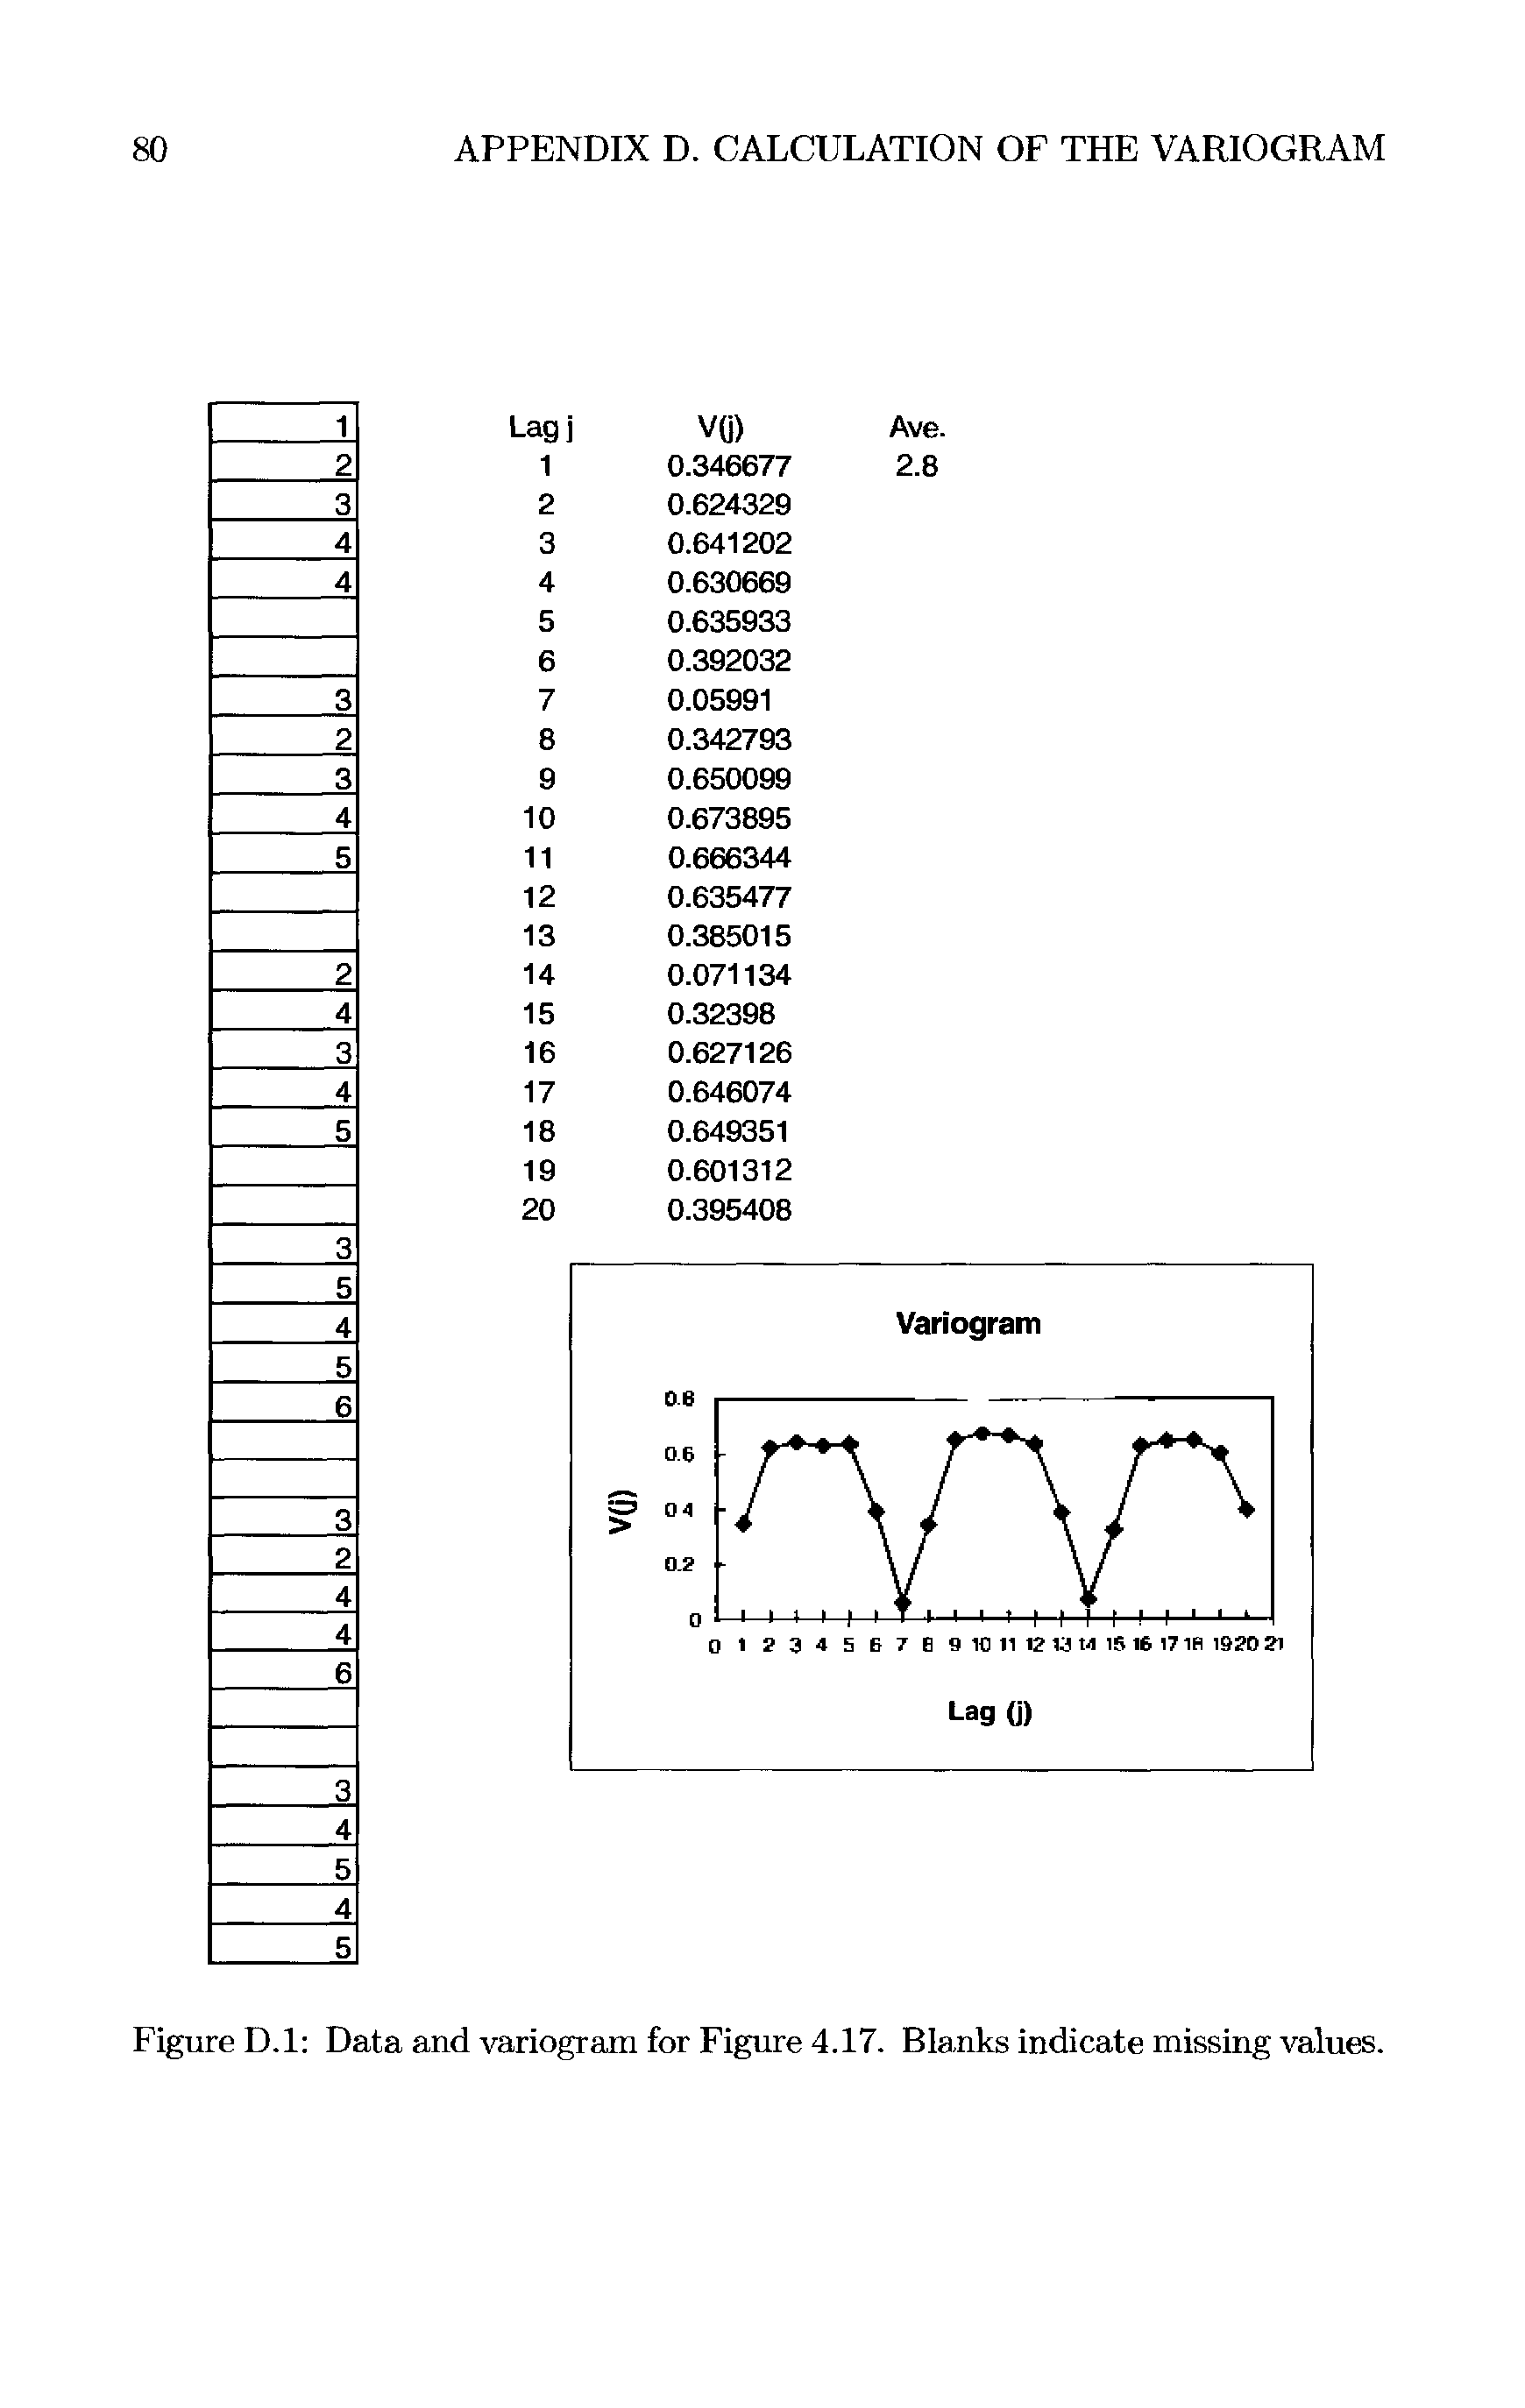 Figure D.l Data and variogram for Figure 4.17. Blanks indicate missing values.